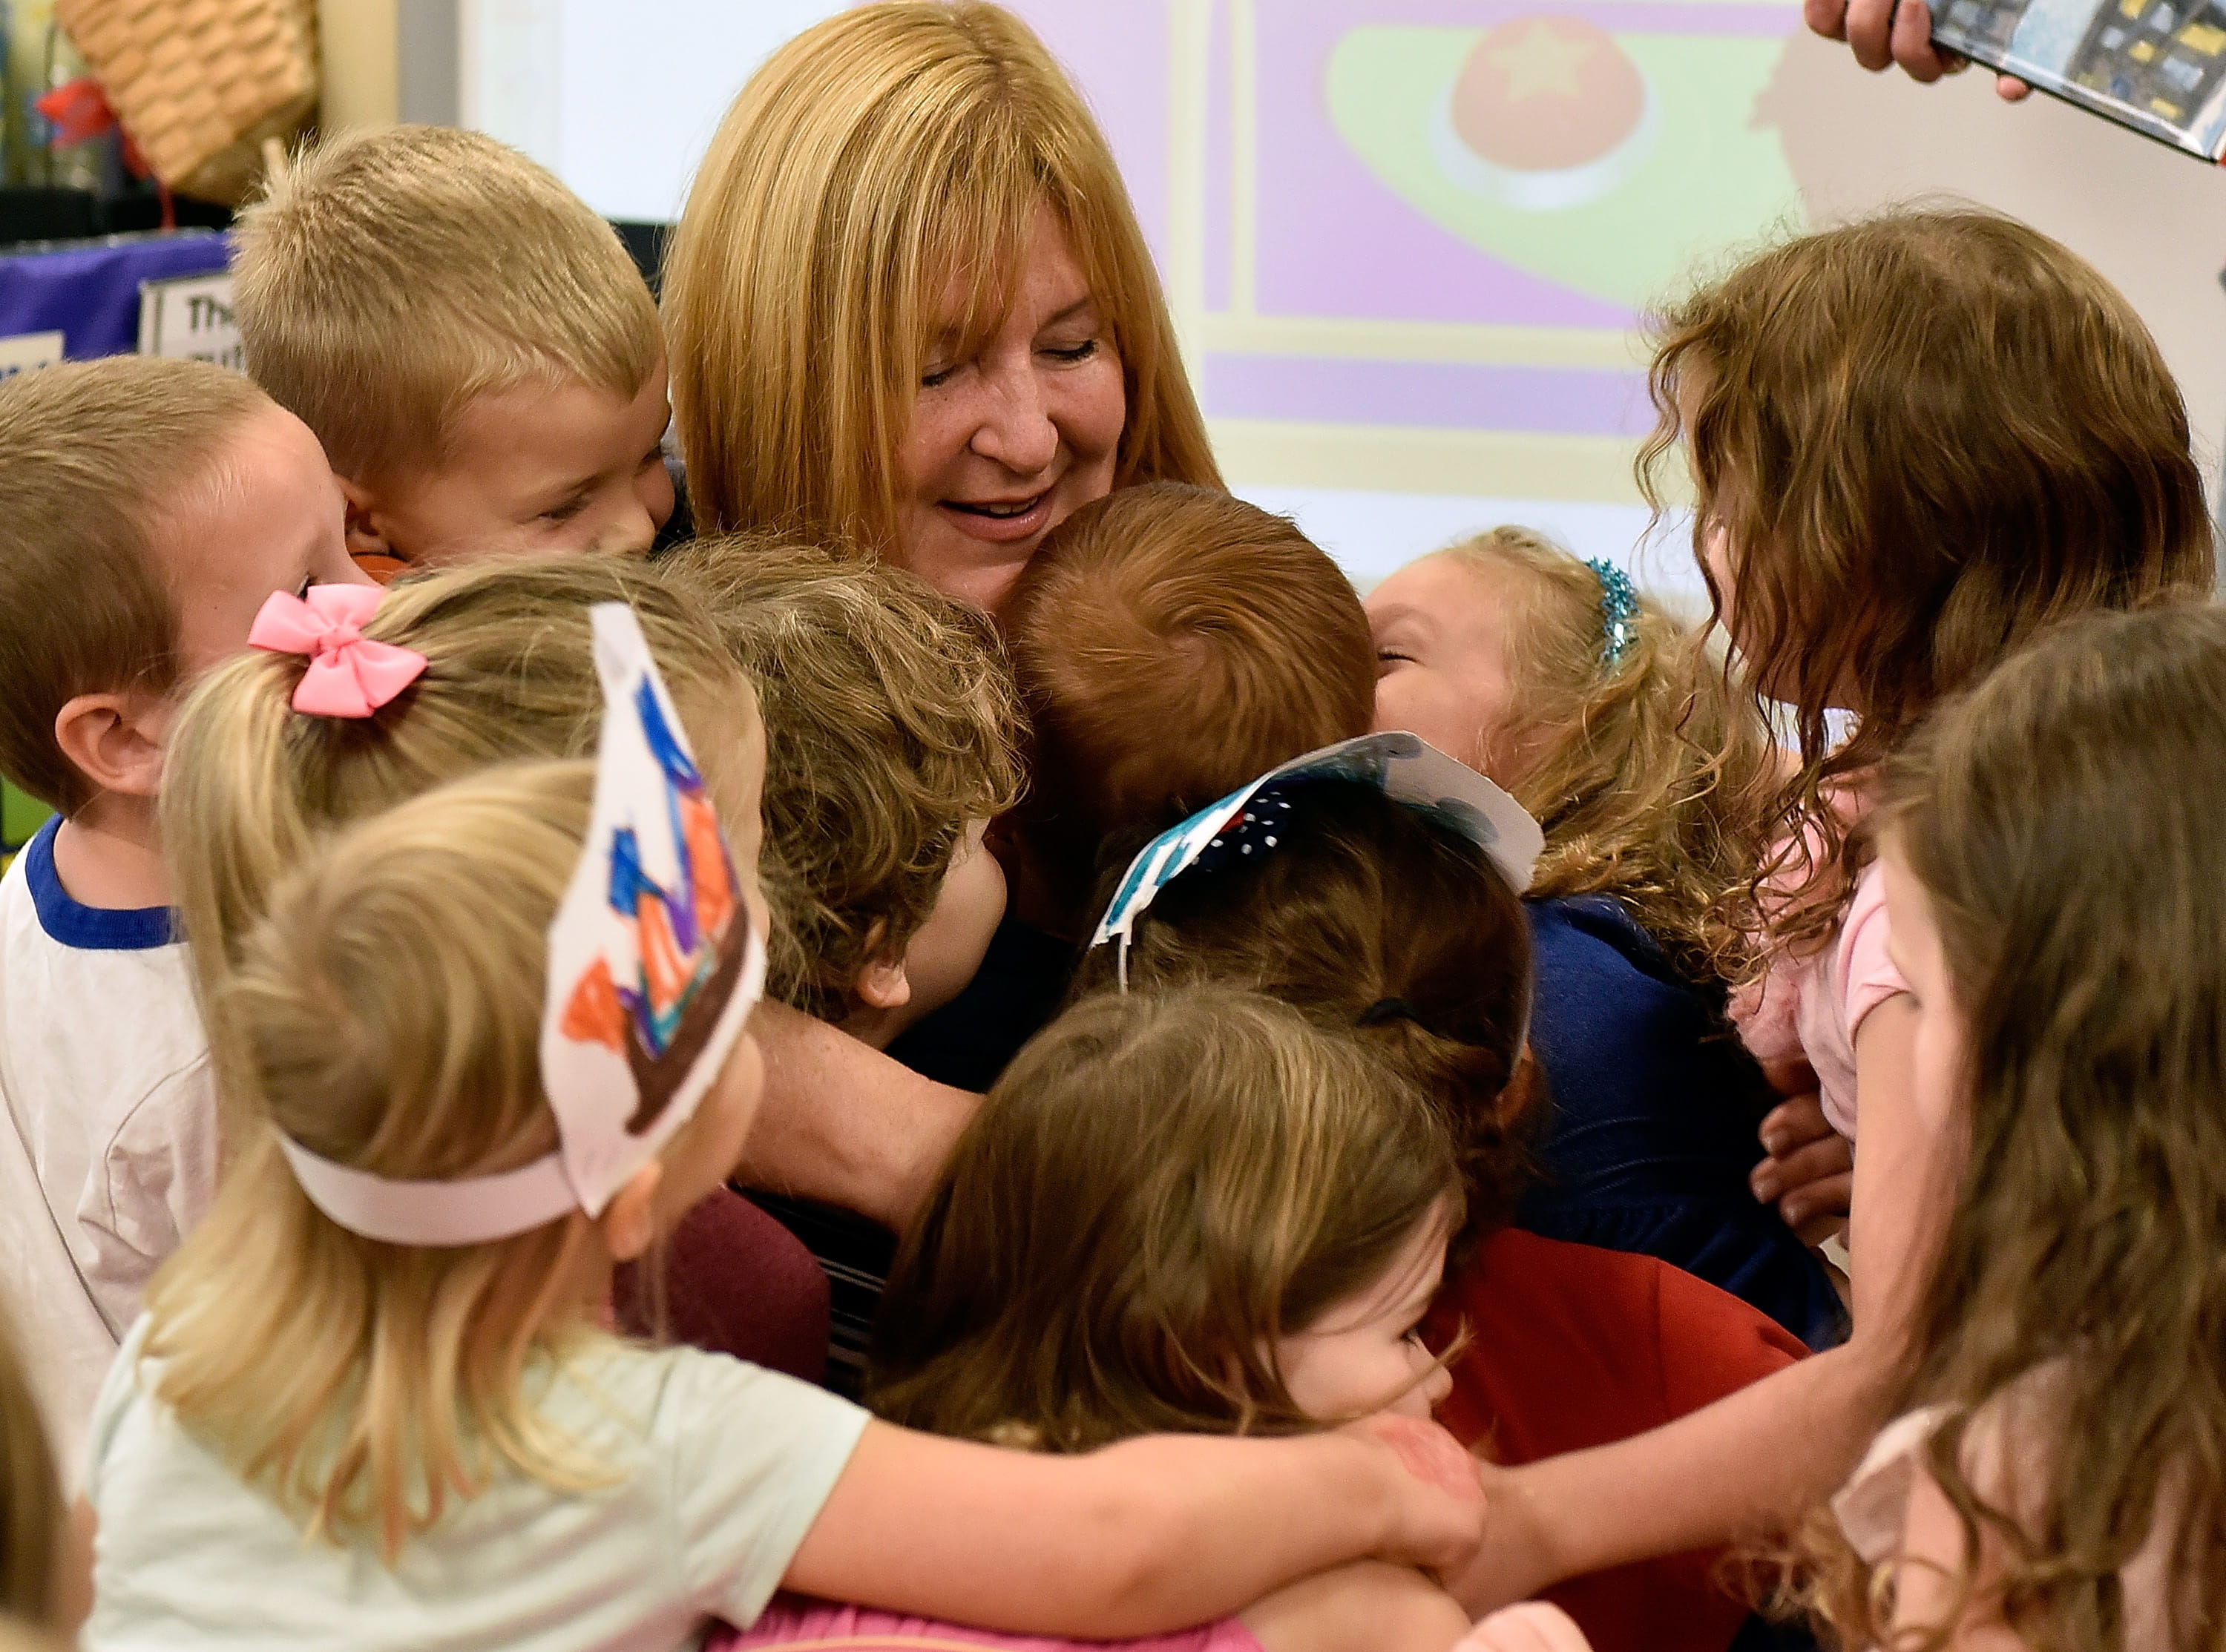 After winning an Early Childhood Educator Award, preK teacher Sue Davies was engulfed by warm hugs. Photo by Getty Images